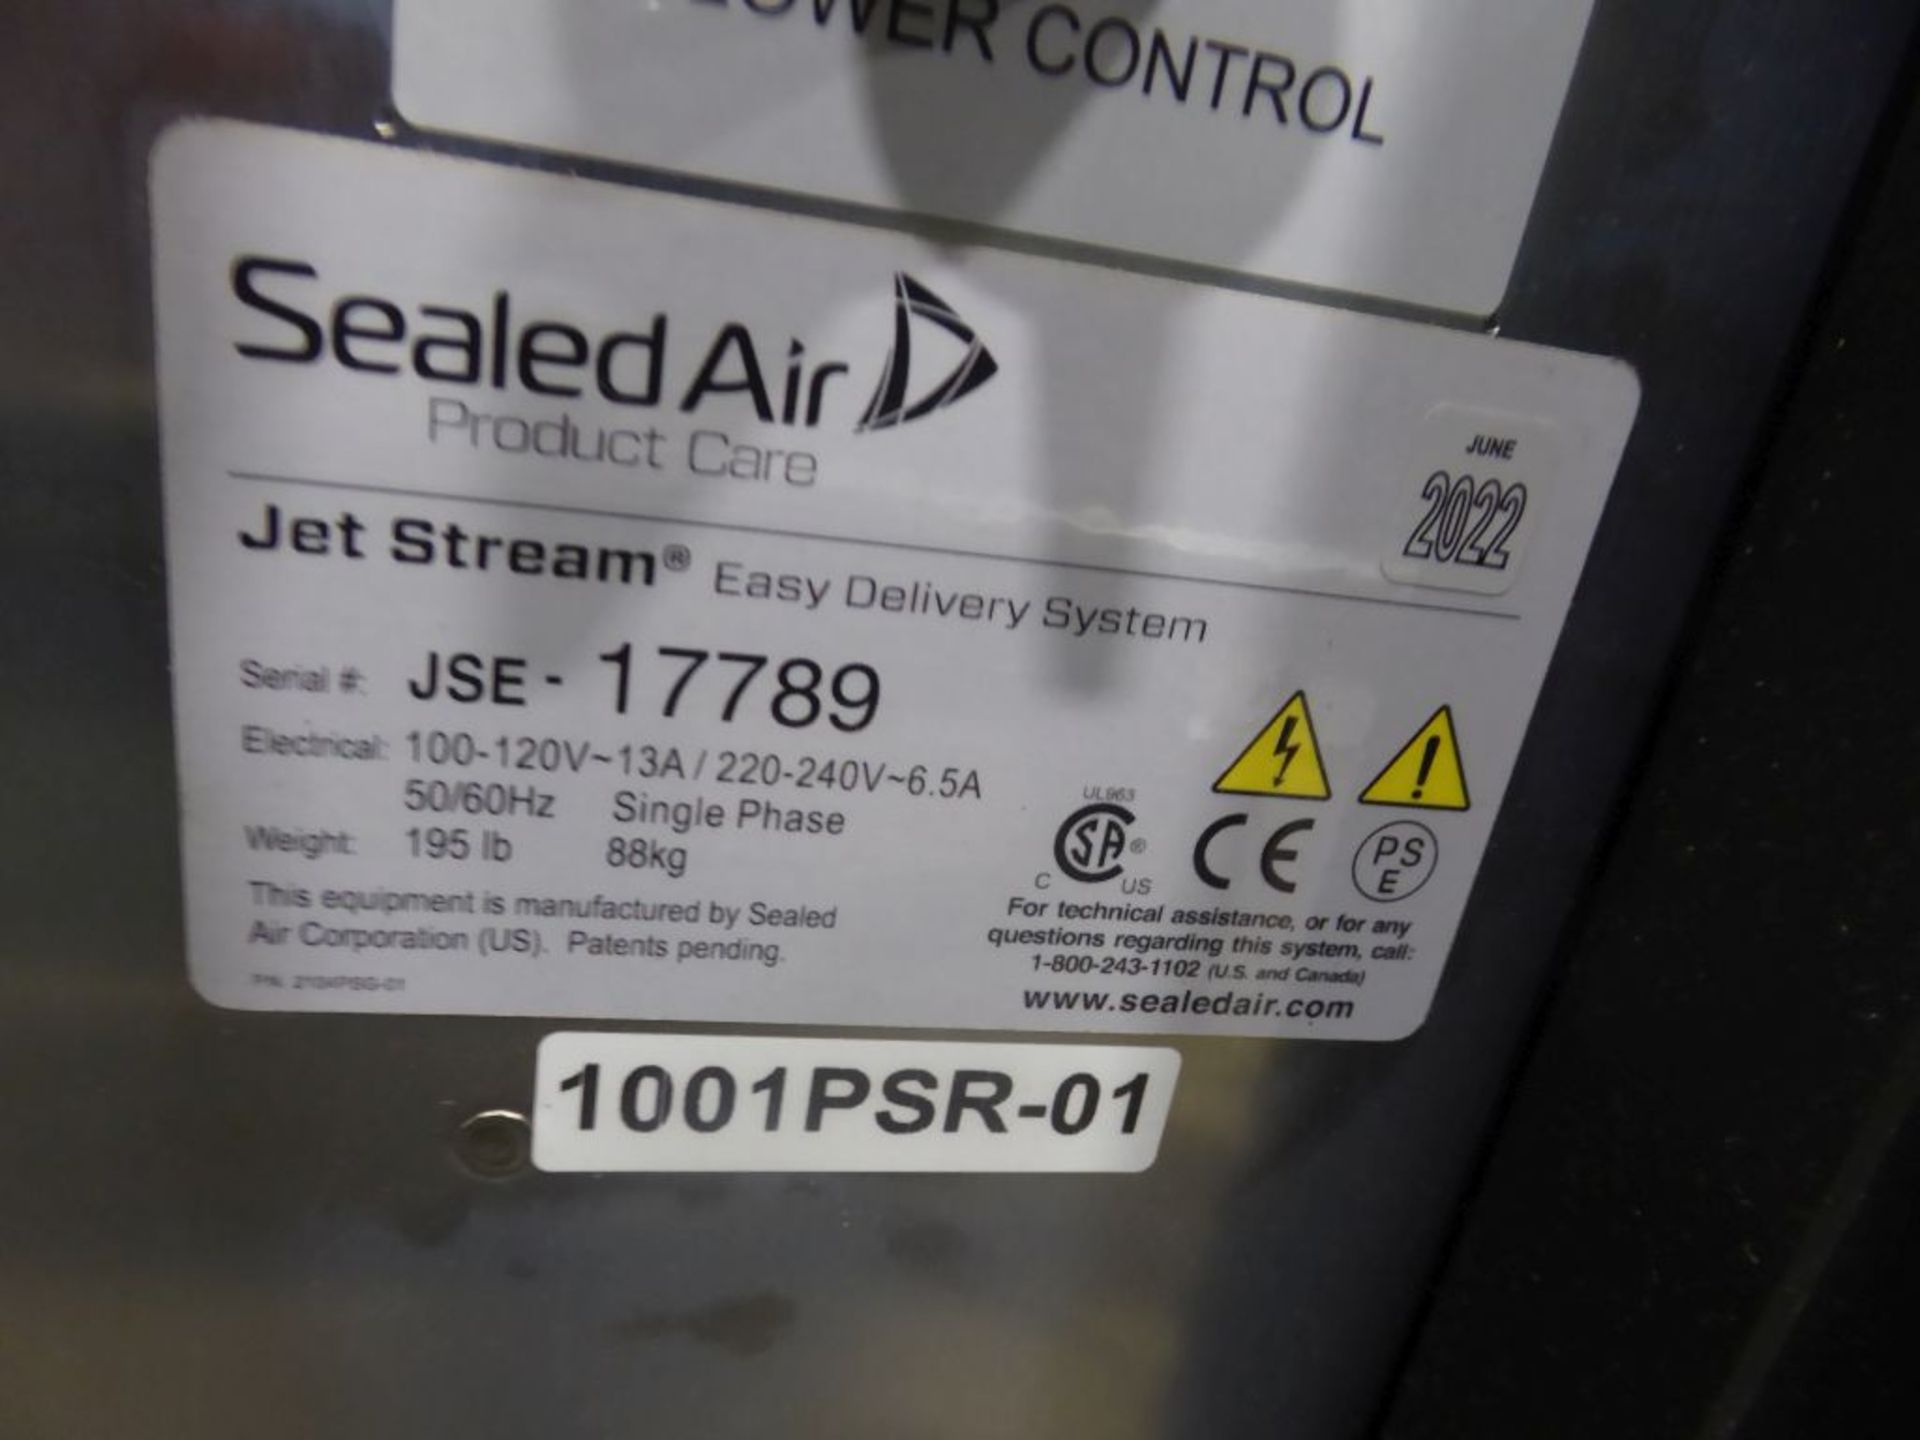 Sealed Air Jet Stream Easy Delivery System - Image 3 of 3